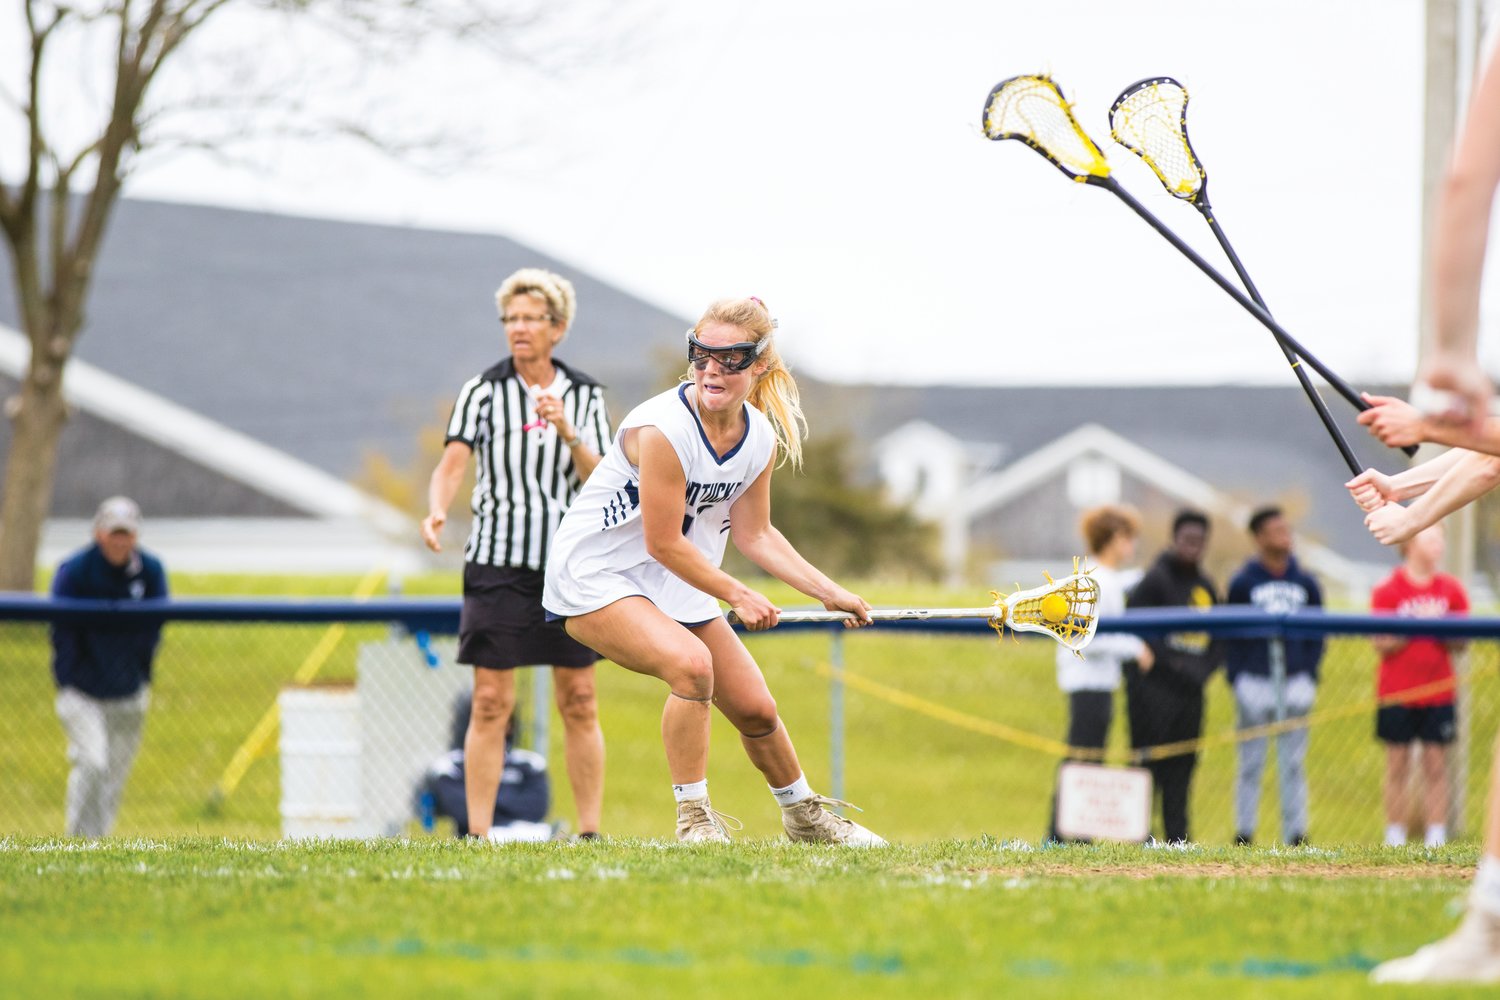 Bailey Lower in action on the Nantucket lacrosse field this spring as a high school sophomore.